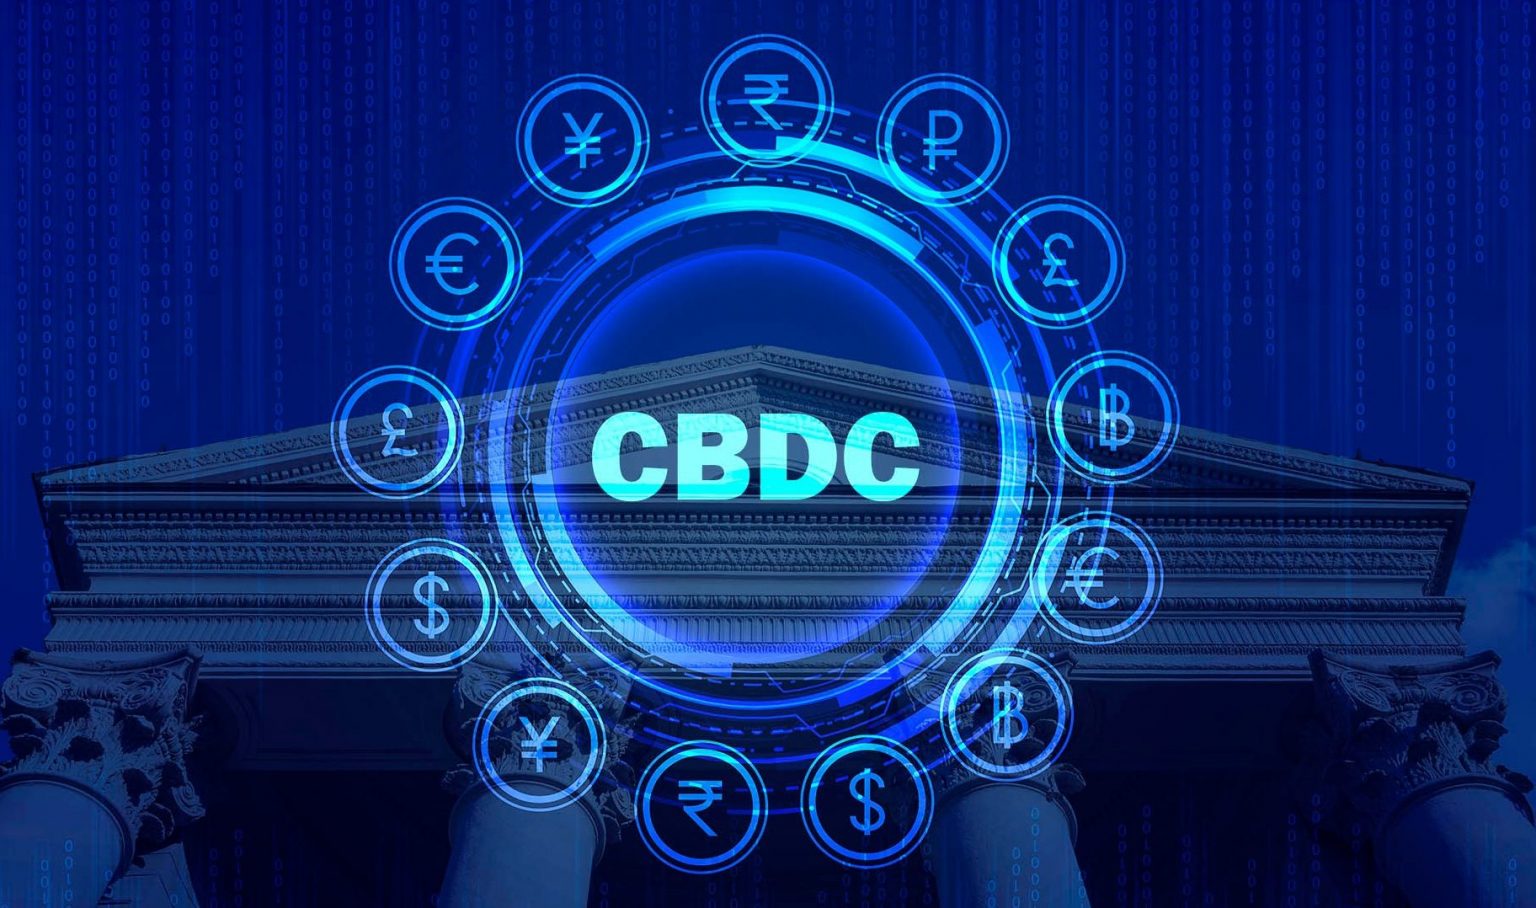 France S Central Bank Digital Currency Cbdc Enters The Next Phase